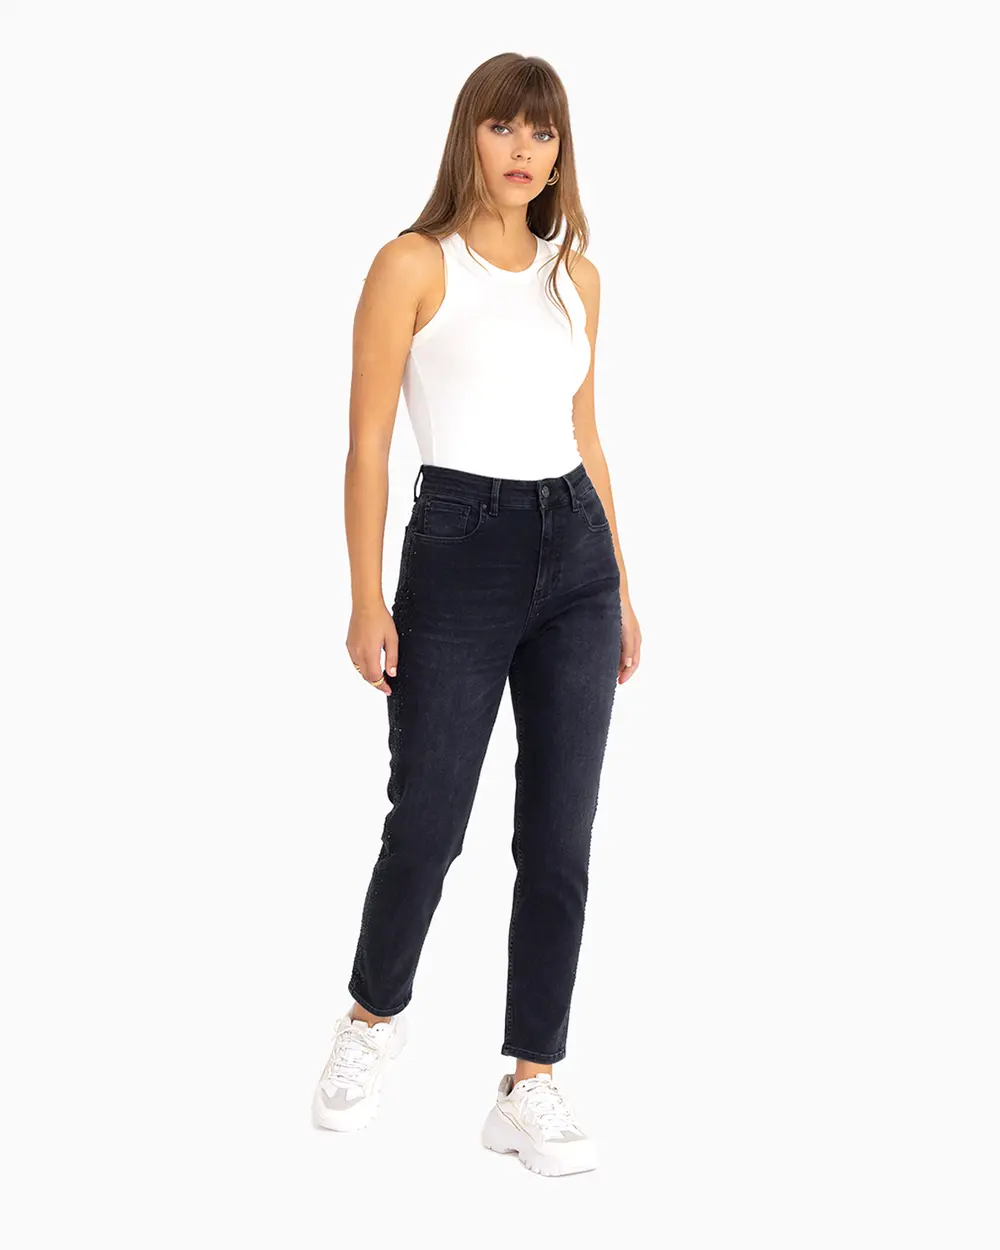 Stone Detailed Ankle Length Jeans